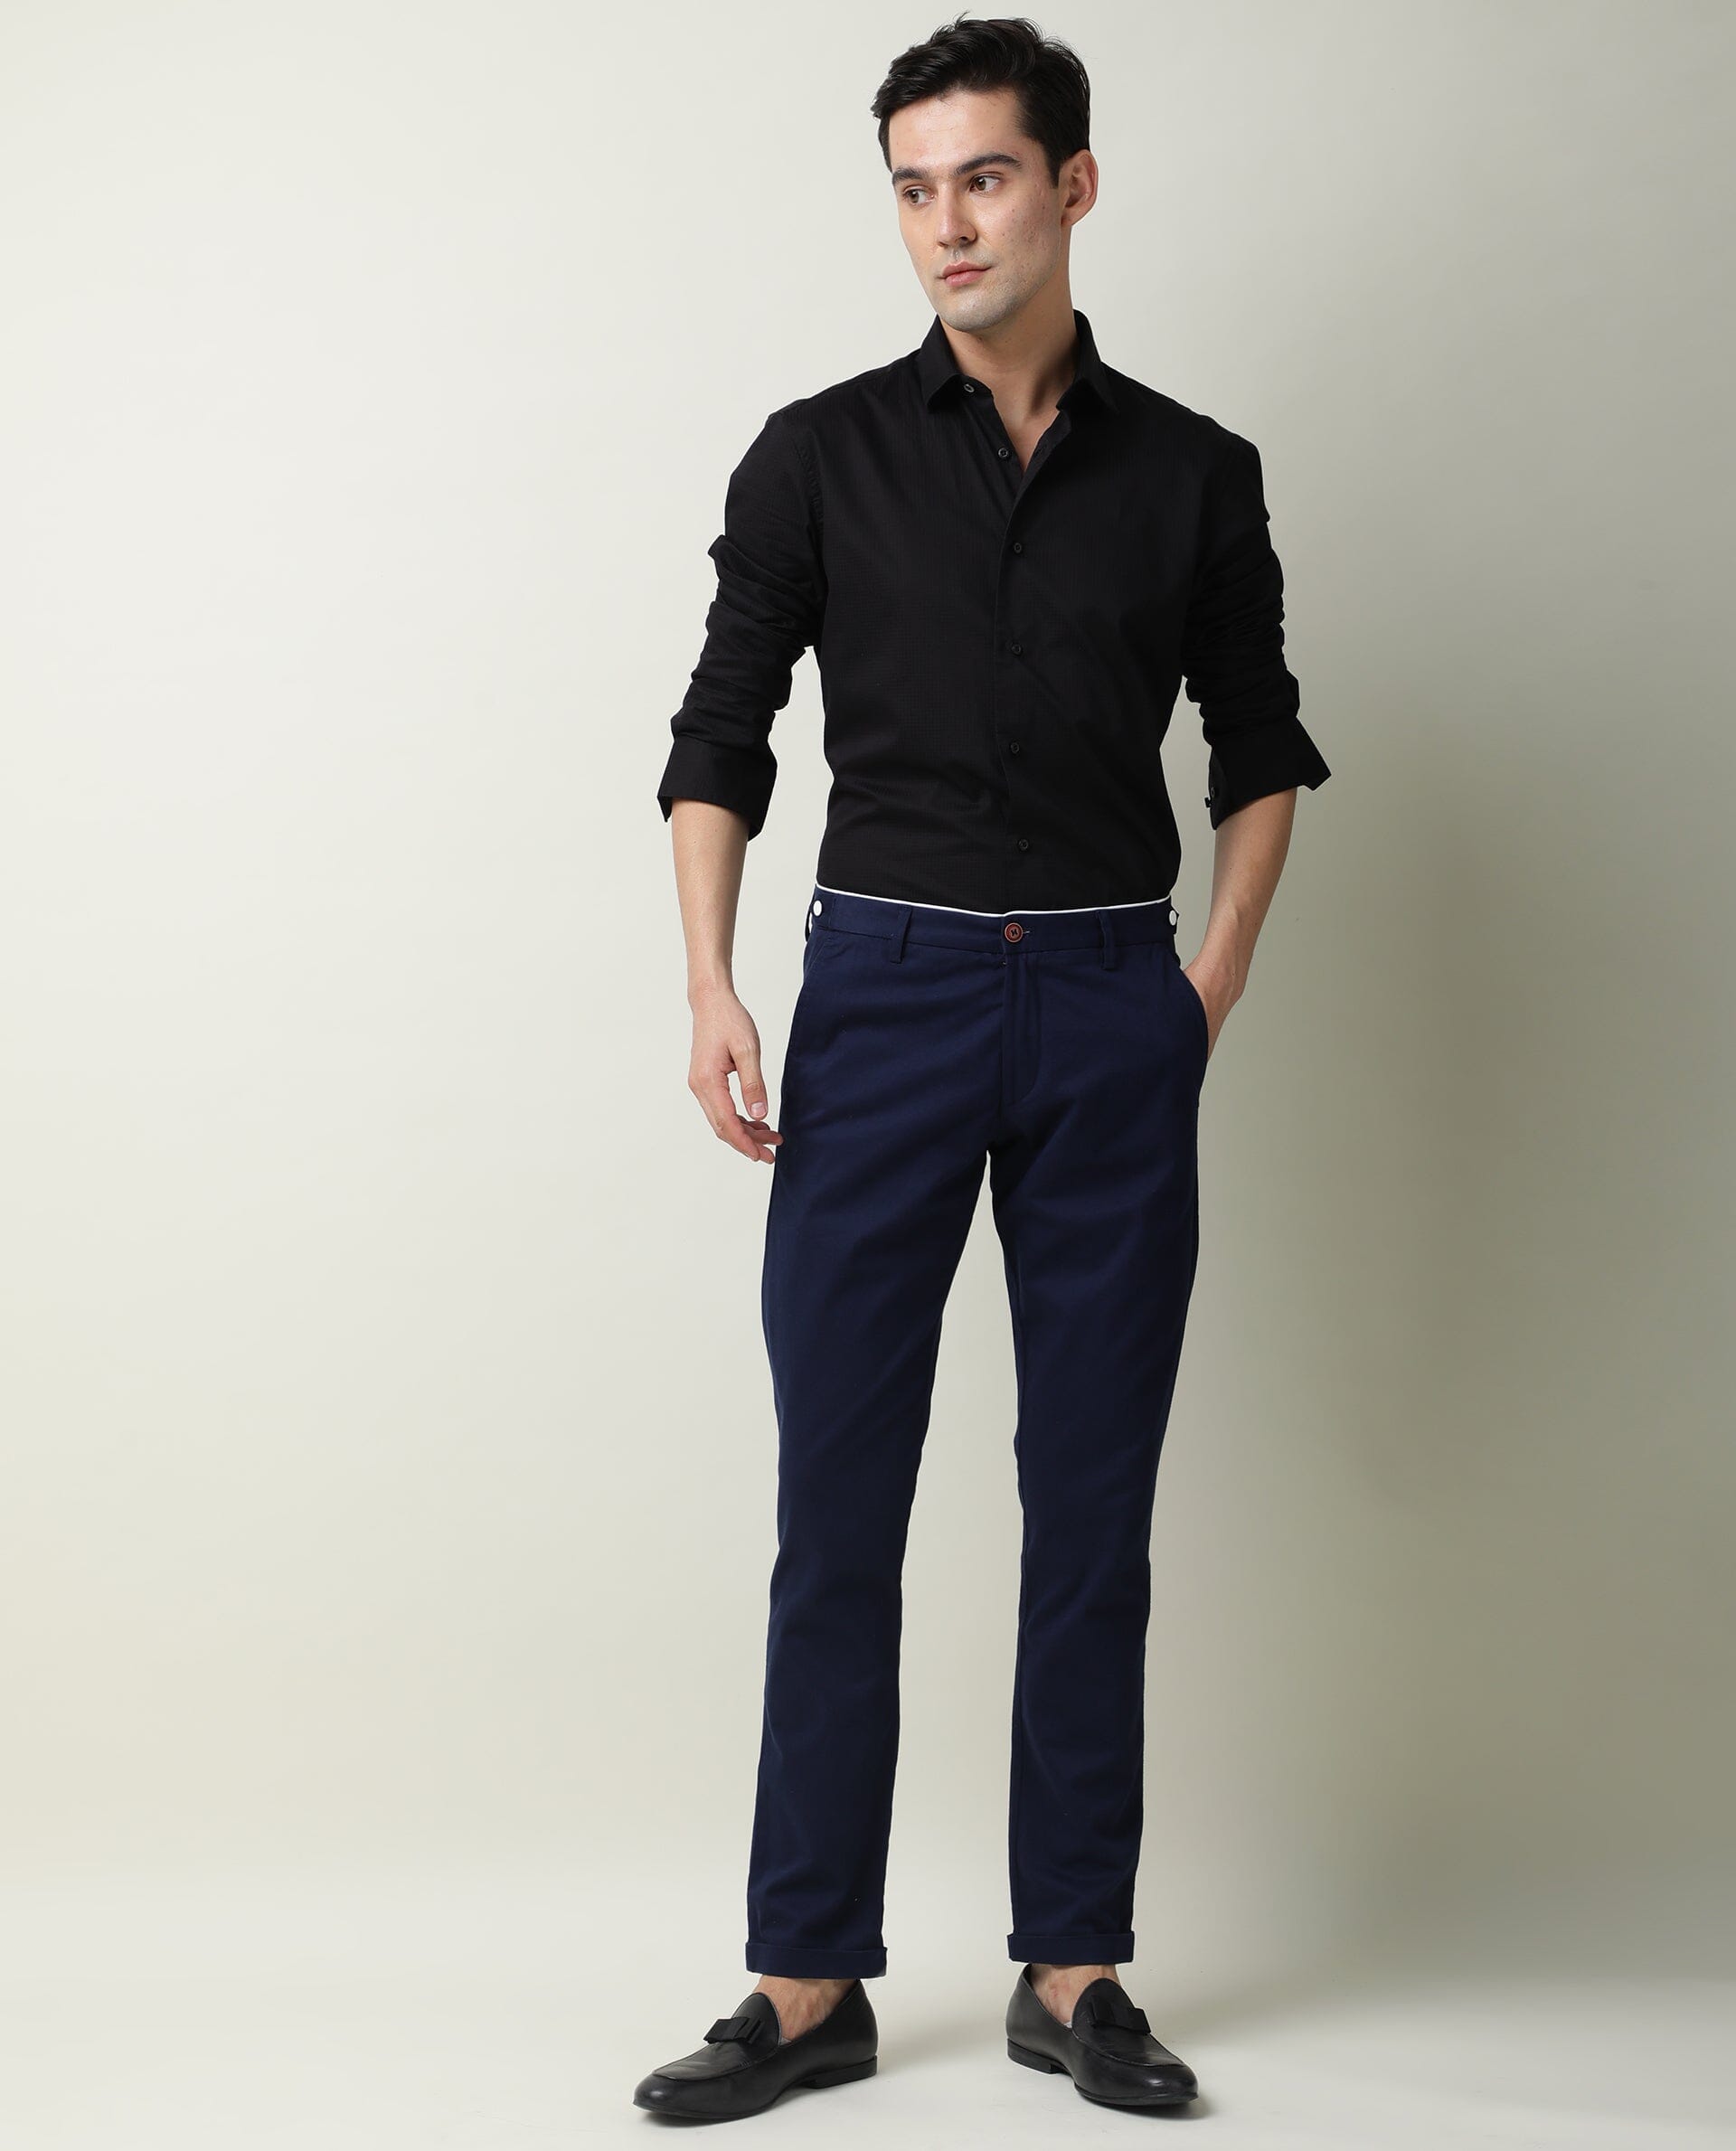 43 Best Navy blue pants outfit ideas  pant shirt colorful shirts mens  outfits